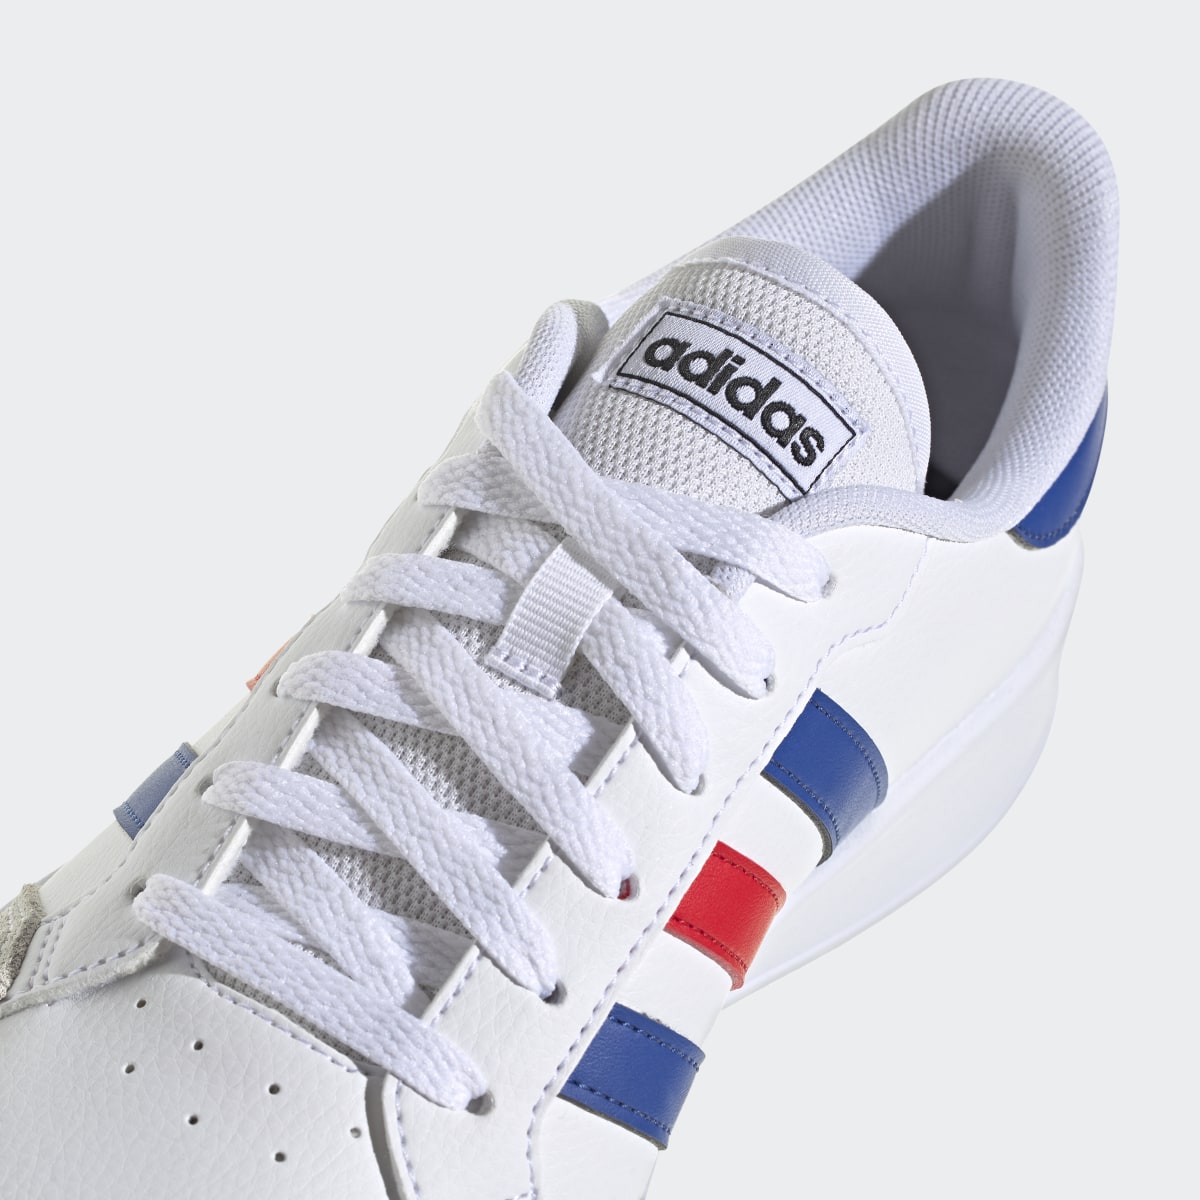 Adidas Breaknet Court Lifestyle Shoes. 10